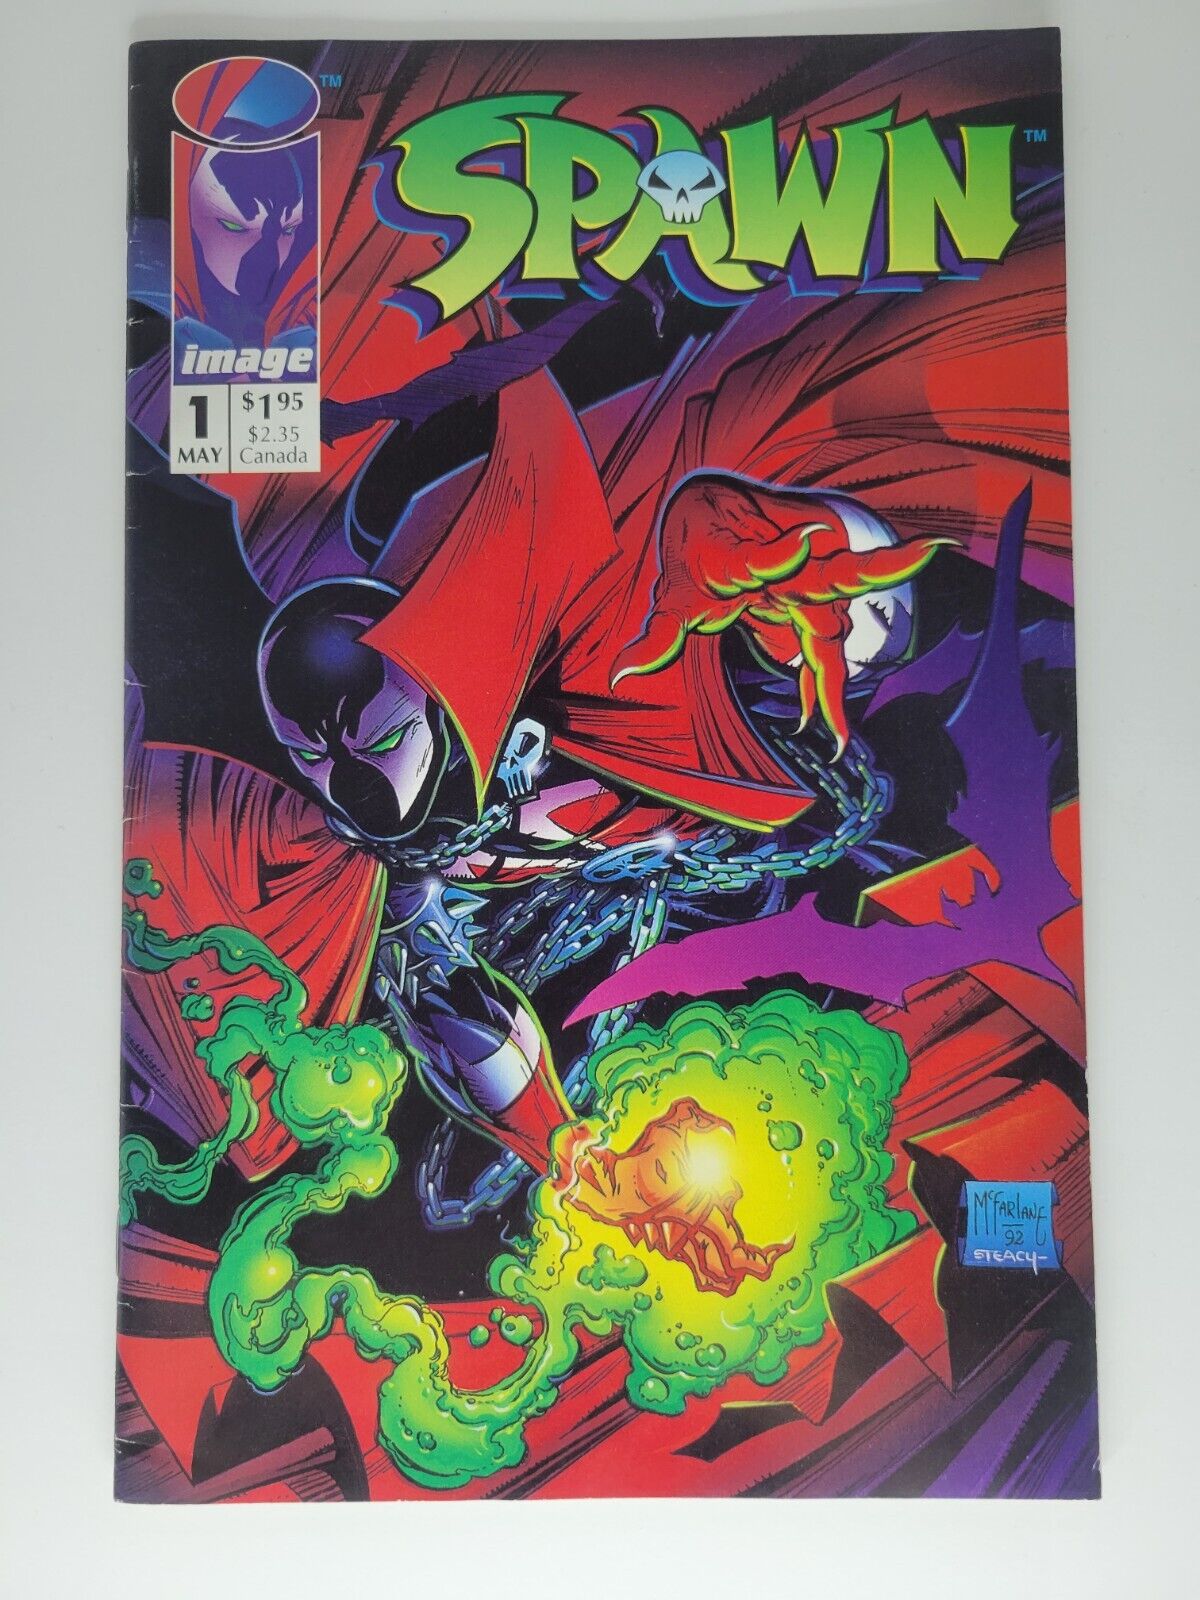 SPAWN #1 FIRST PRINTING 1992 Some Spine wear - Great Condition